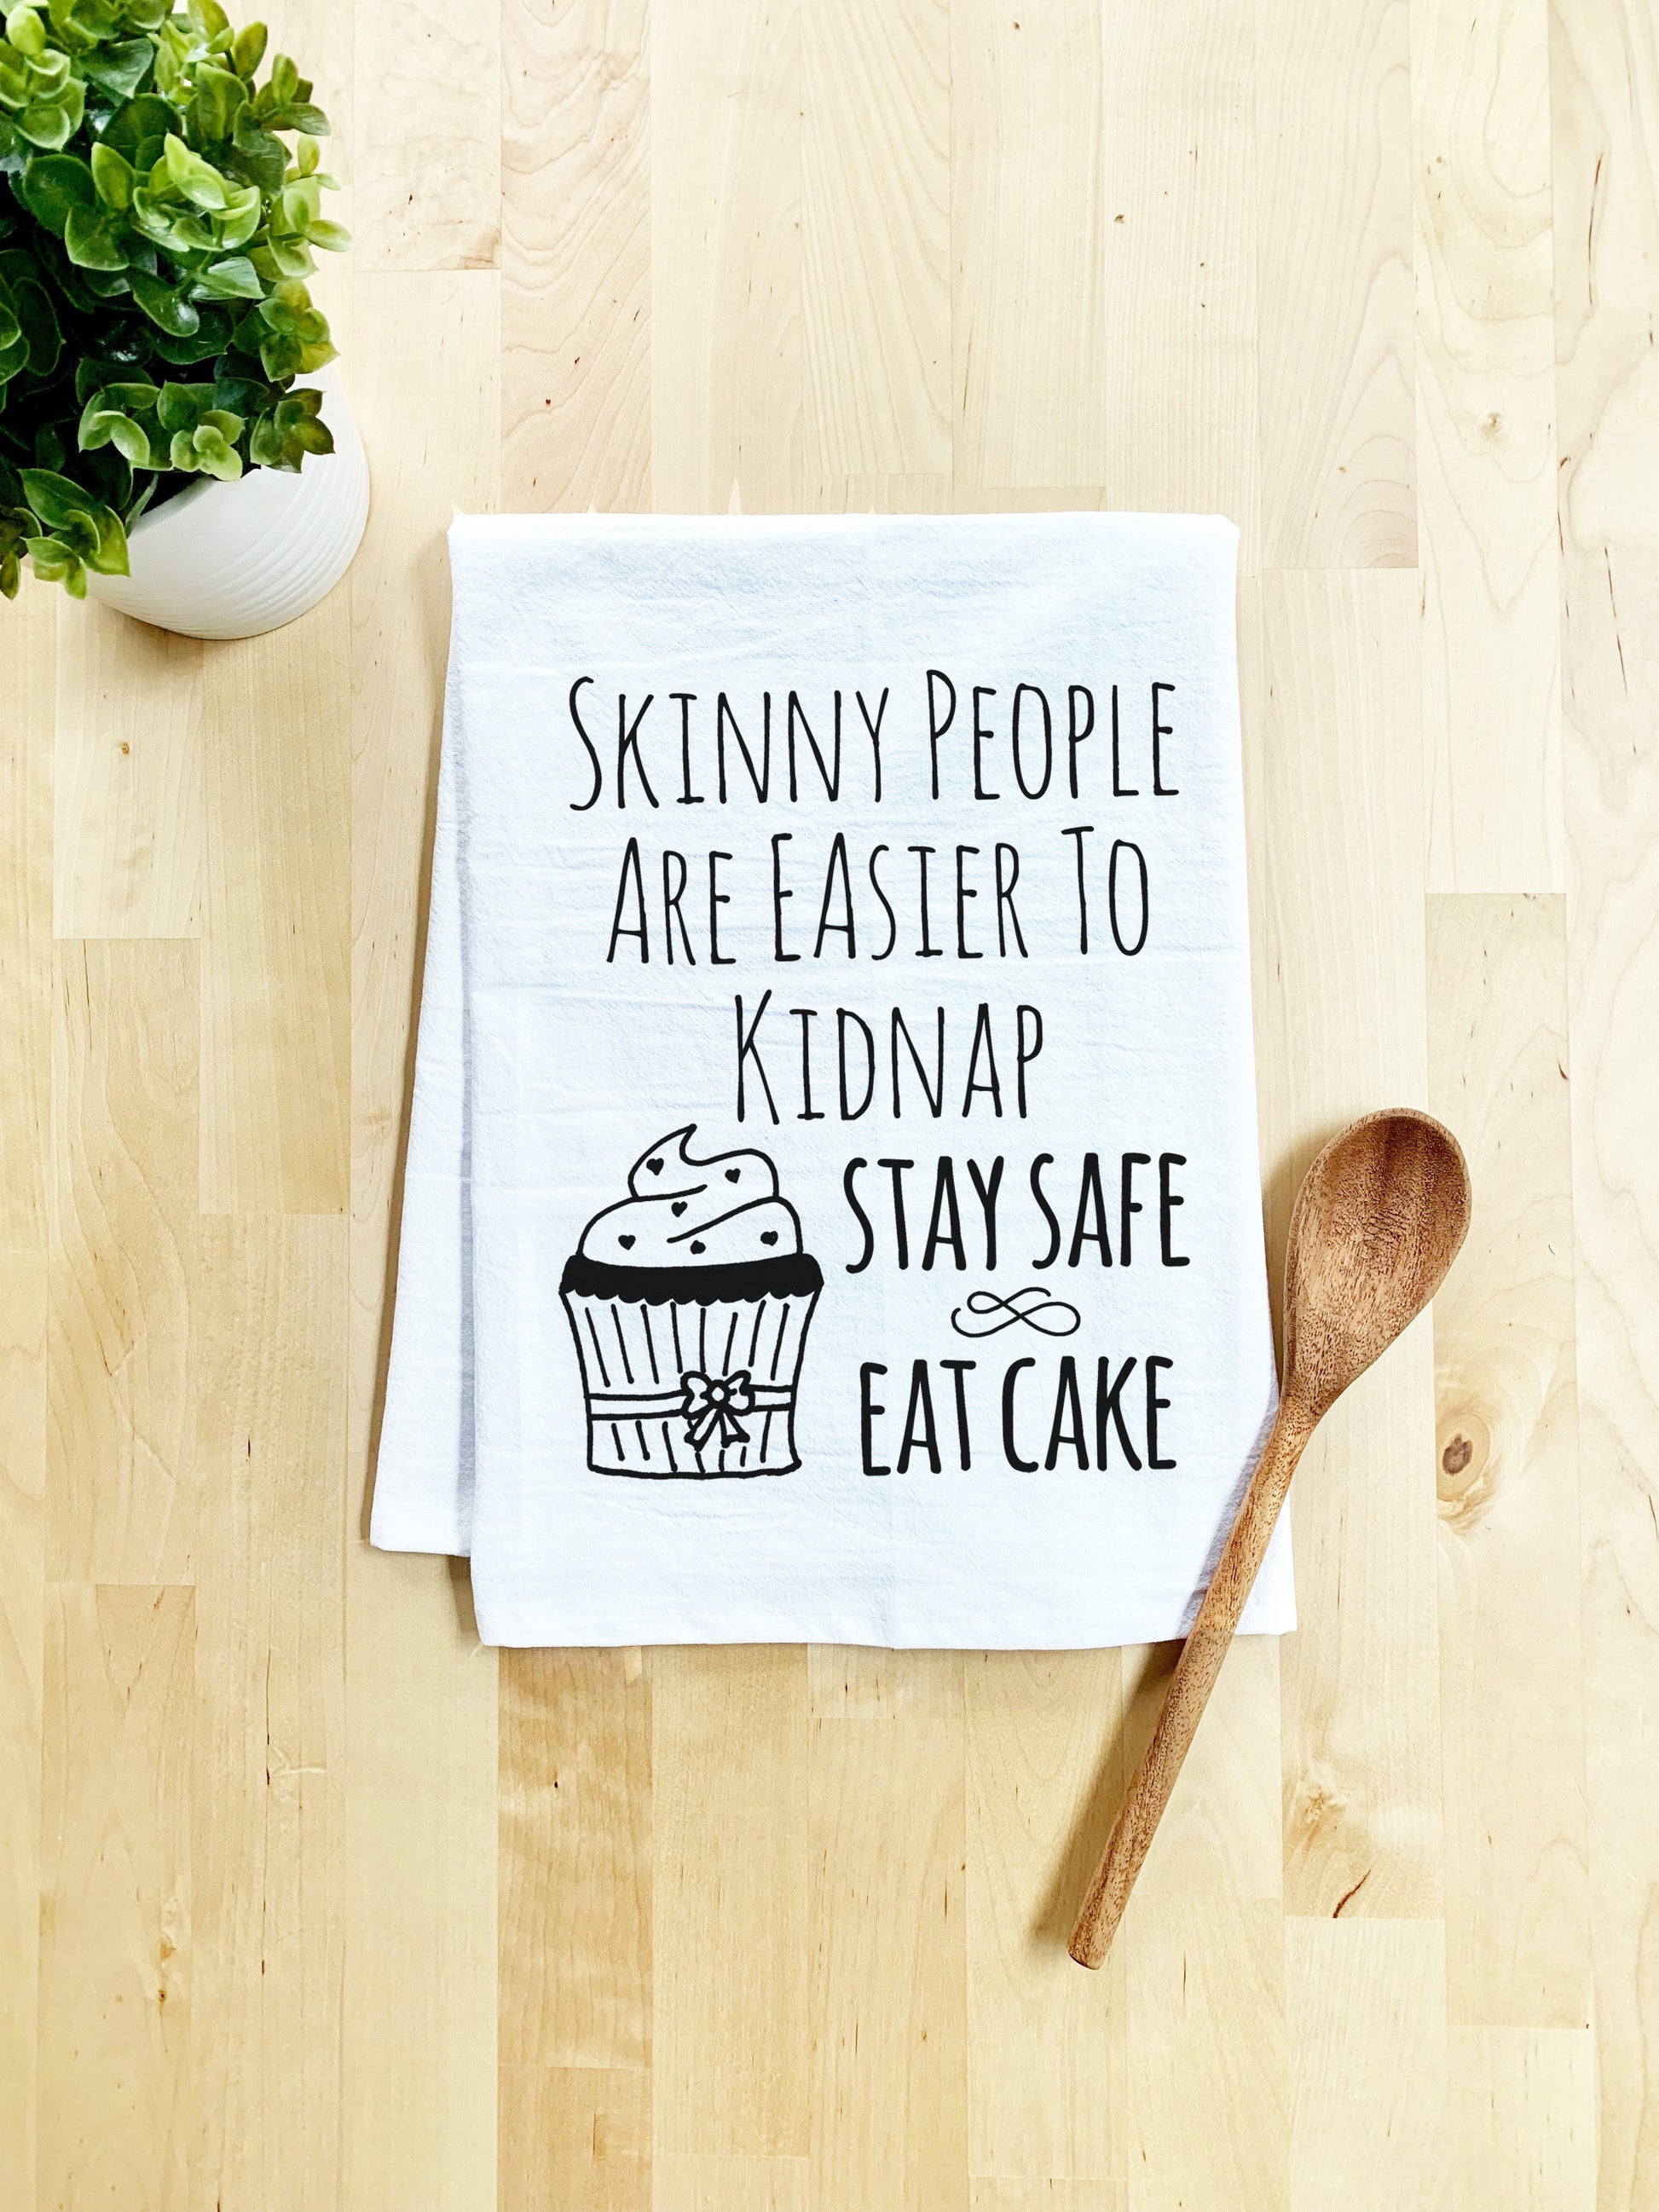 Skinny People Are Easier To Kidnap, Stay Safe Eat Cake Dish Towel - White Or Gray - MoonlightMakers